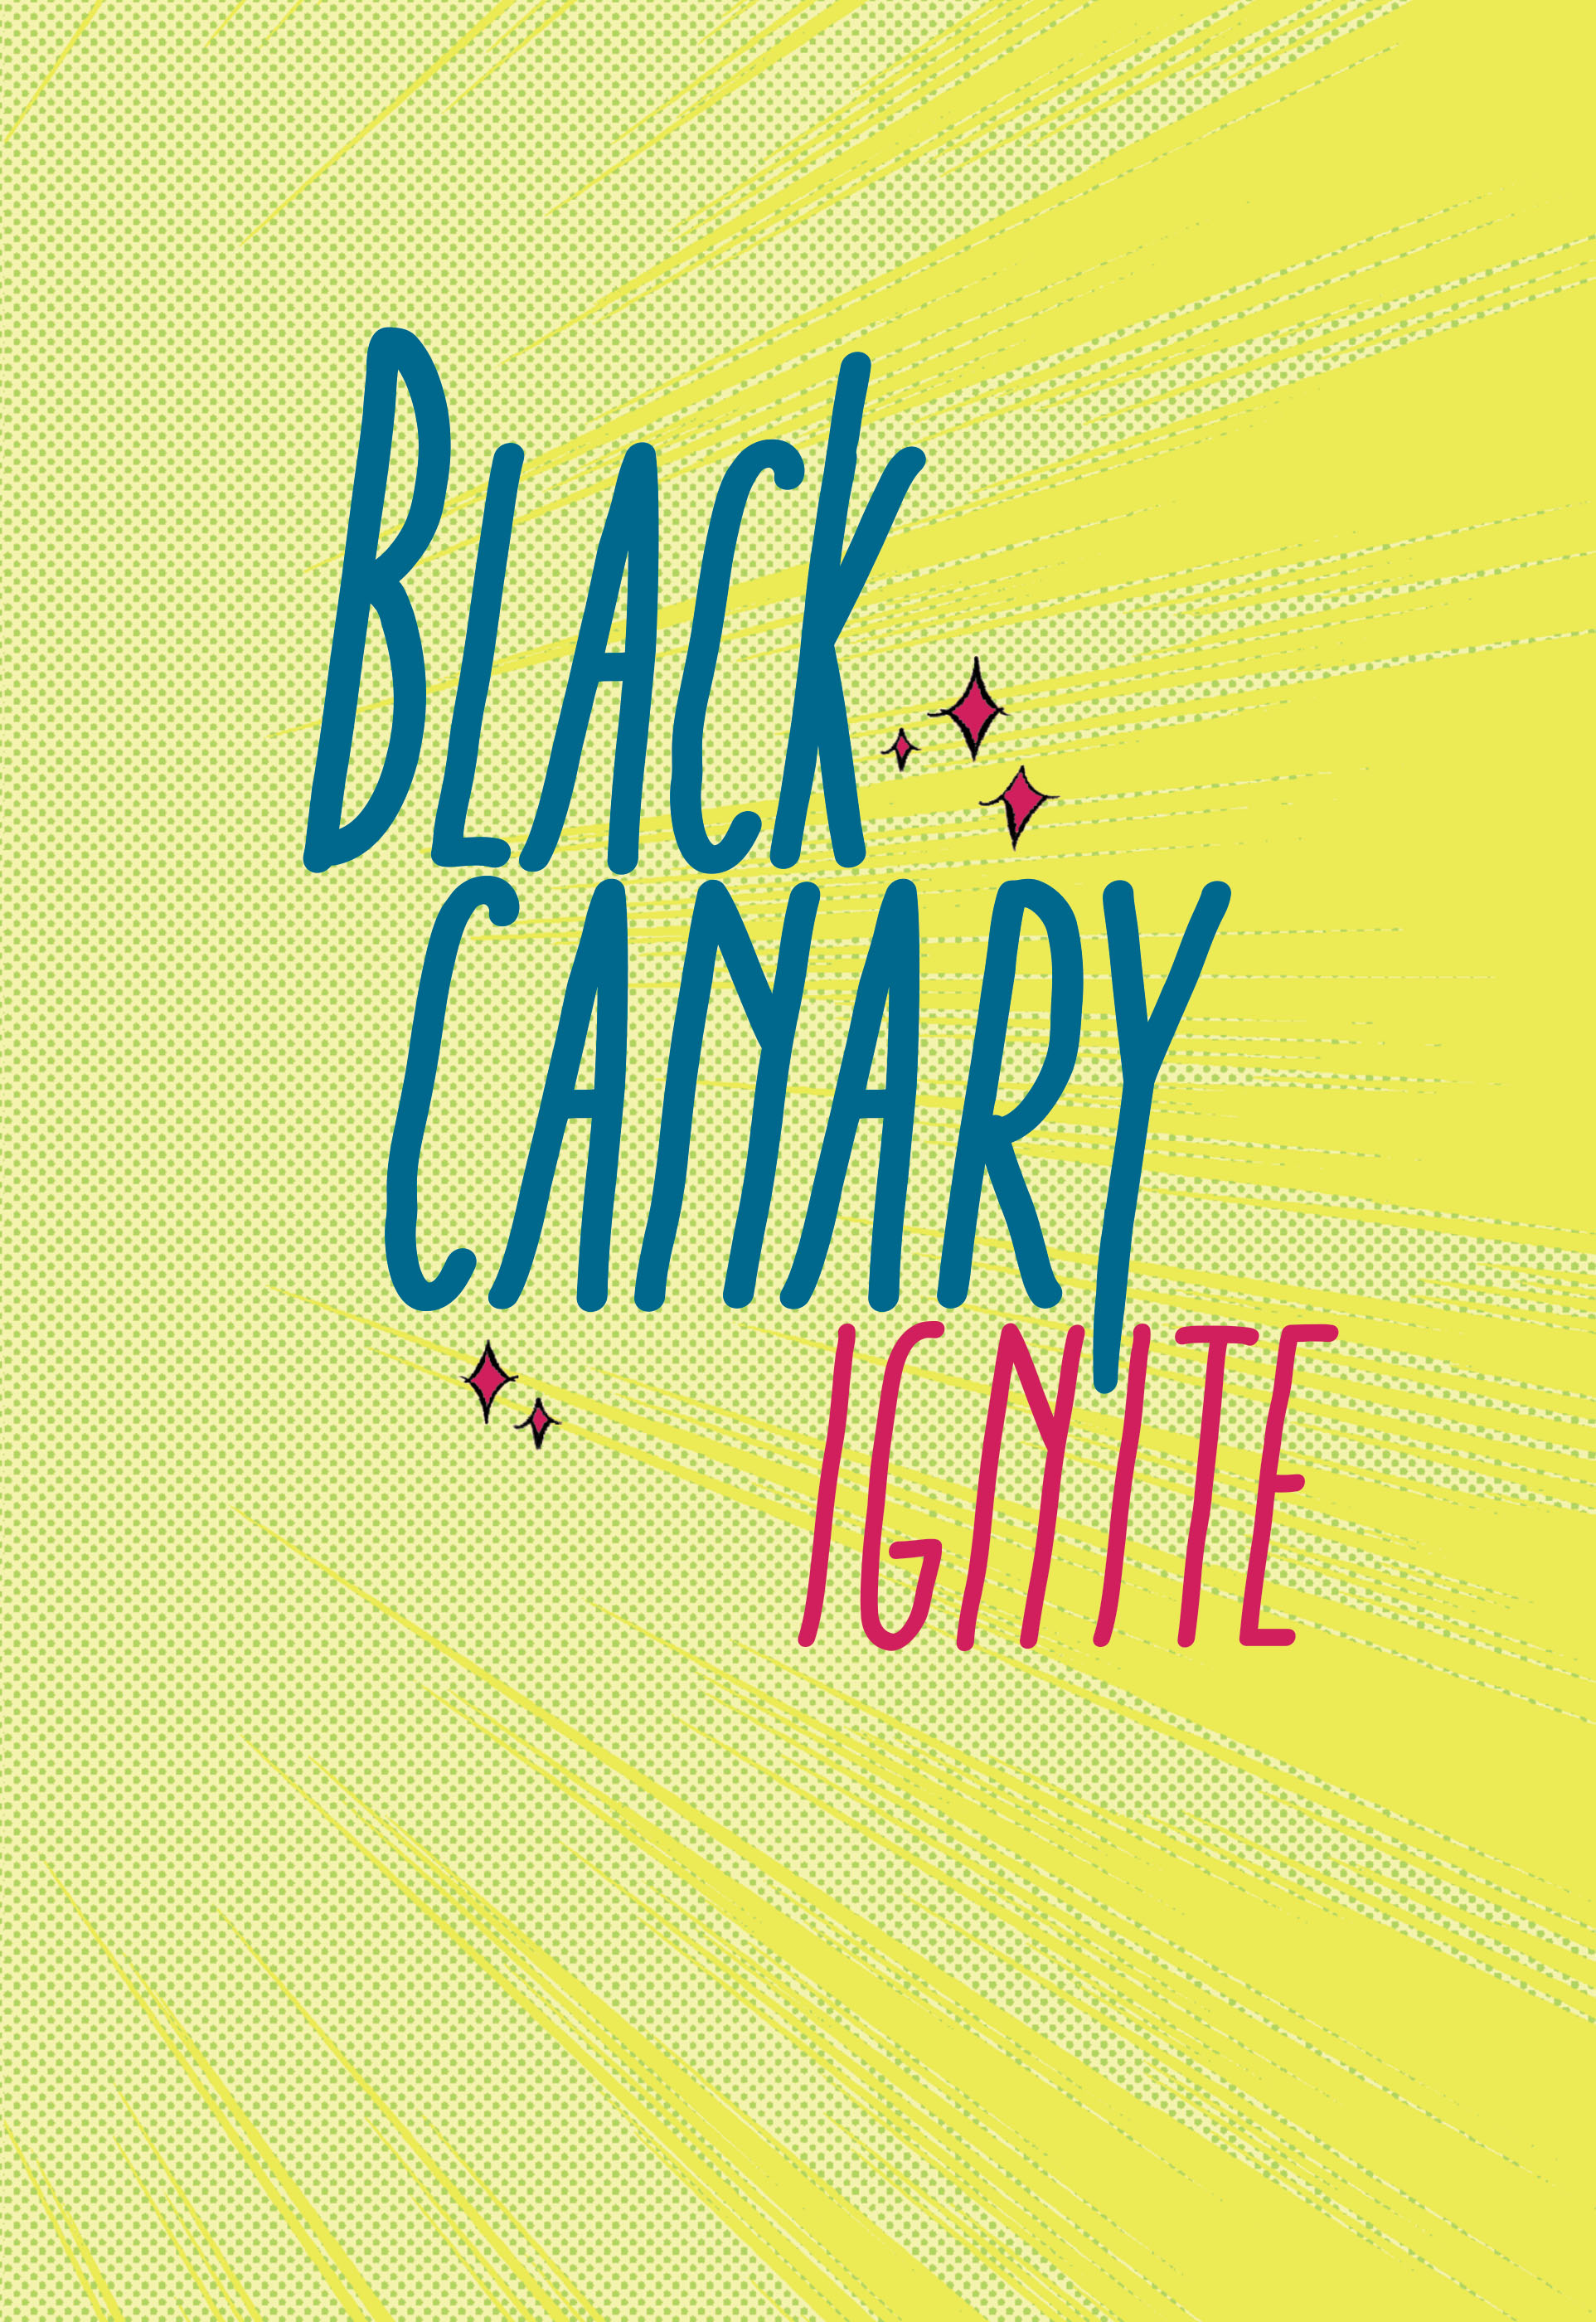 Read online Black Canary: Ignite comic -  Issue # TPB - 2